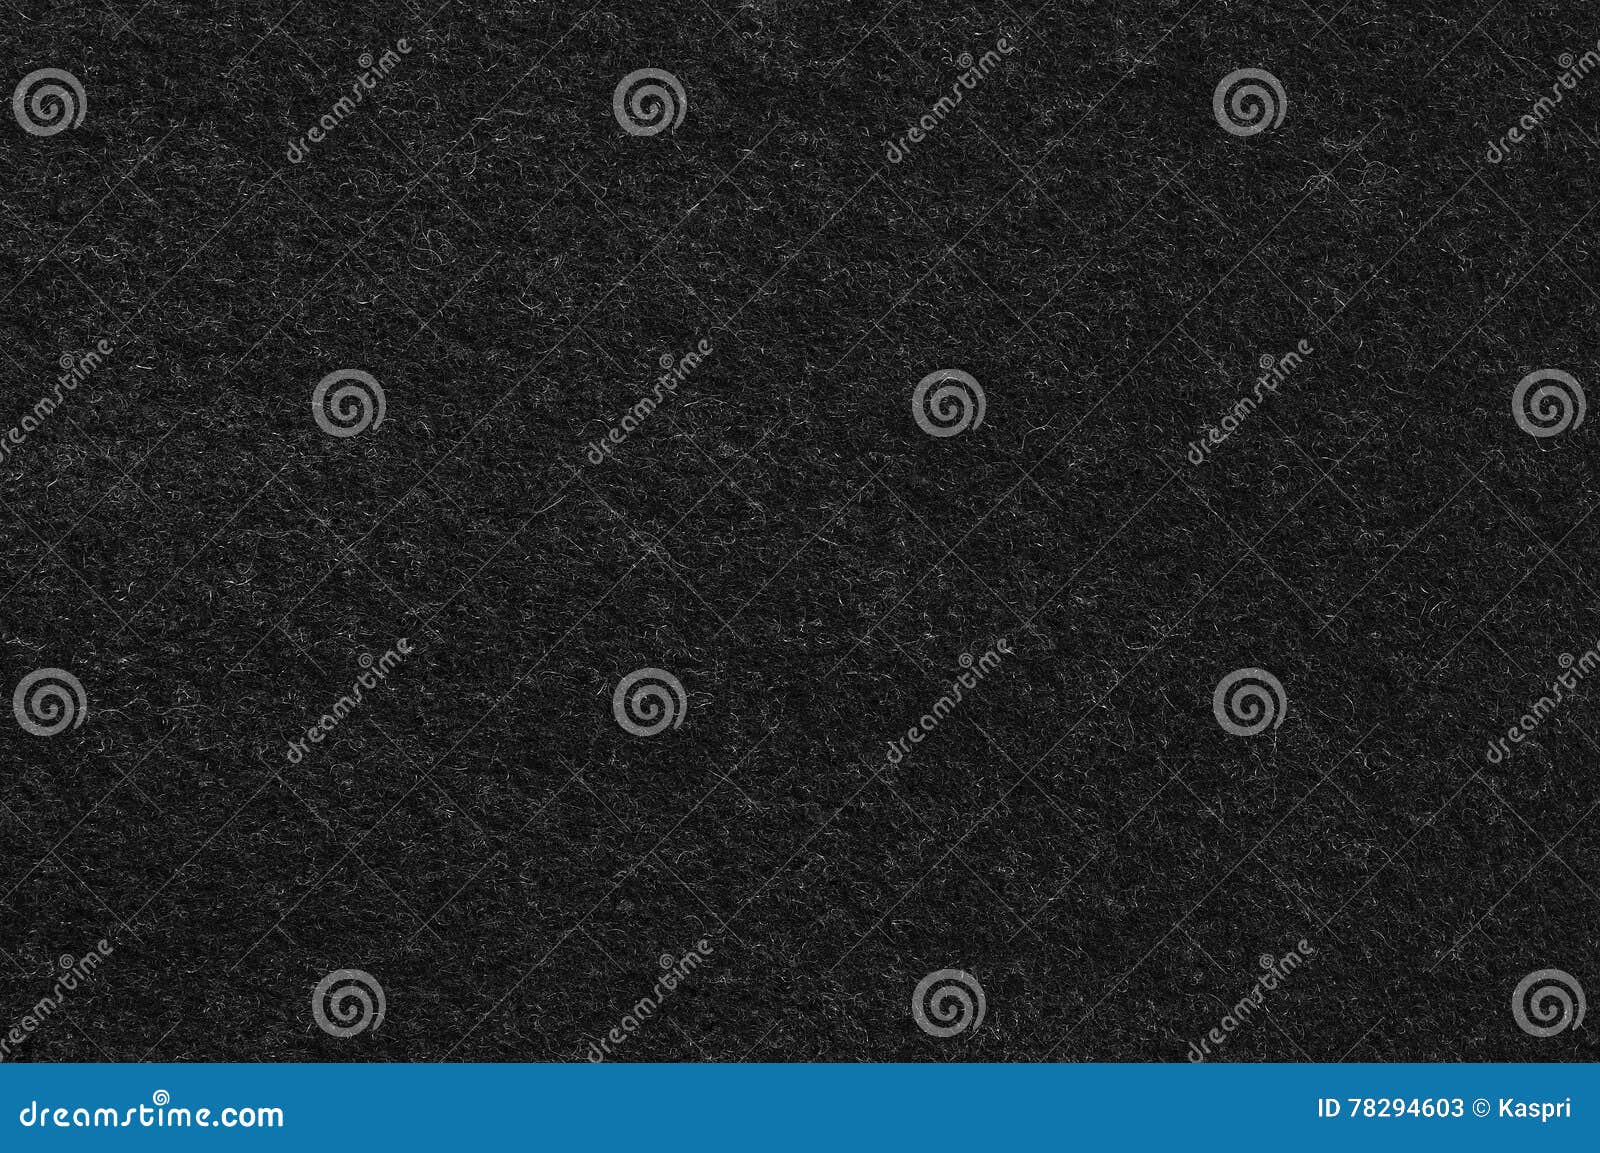 Black Vintage Suit Cout Wool Flannel Fabric Background Texture Pattern ...